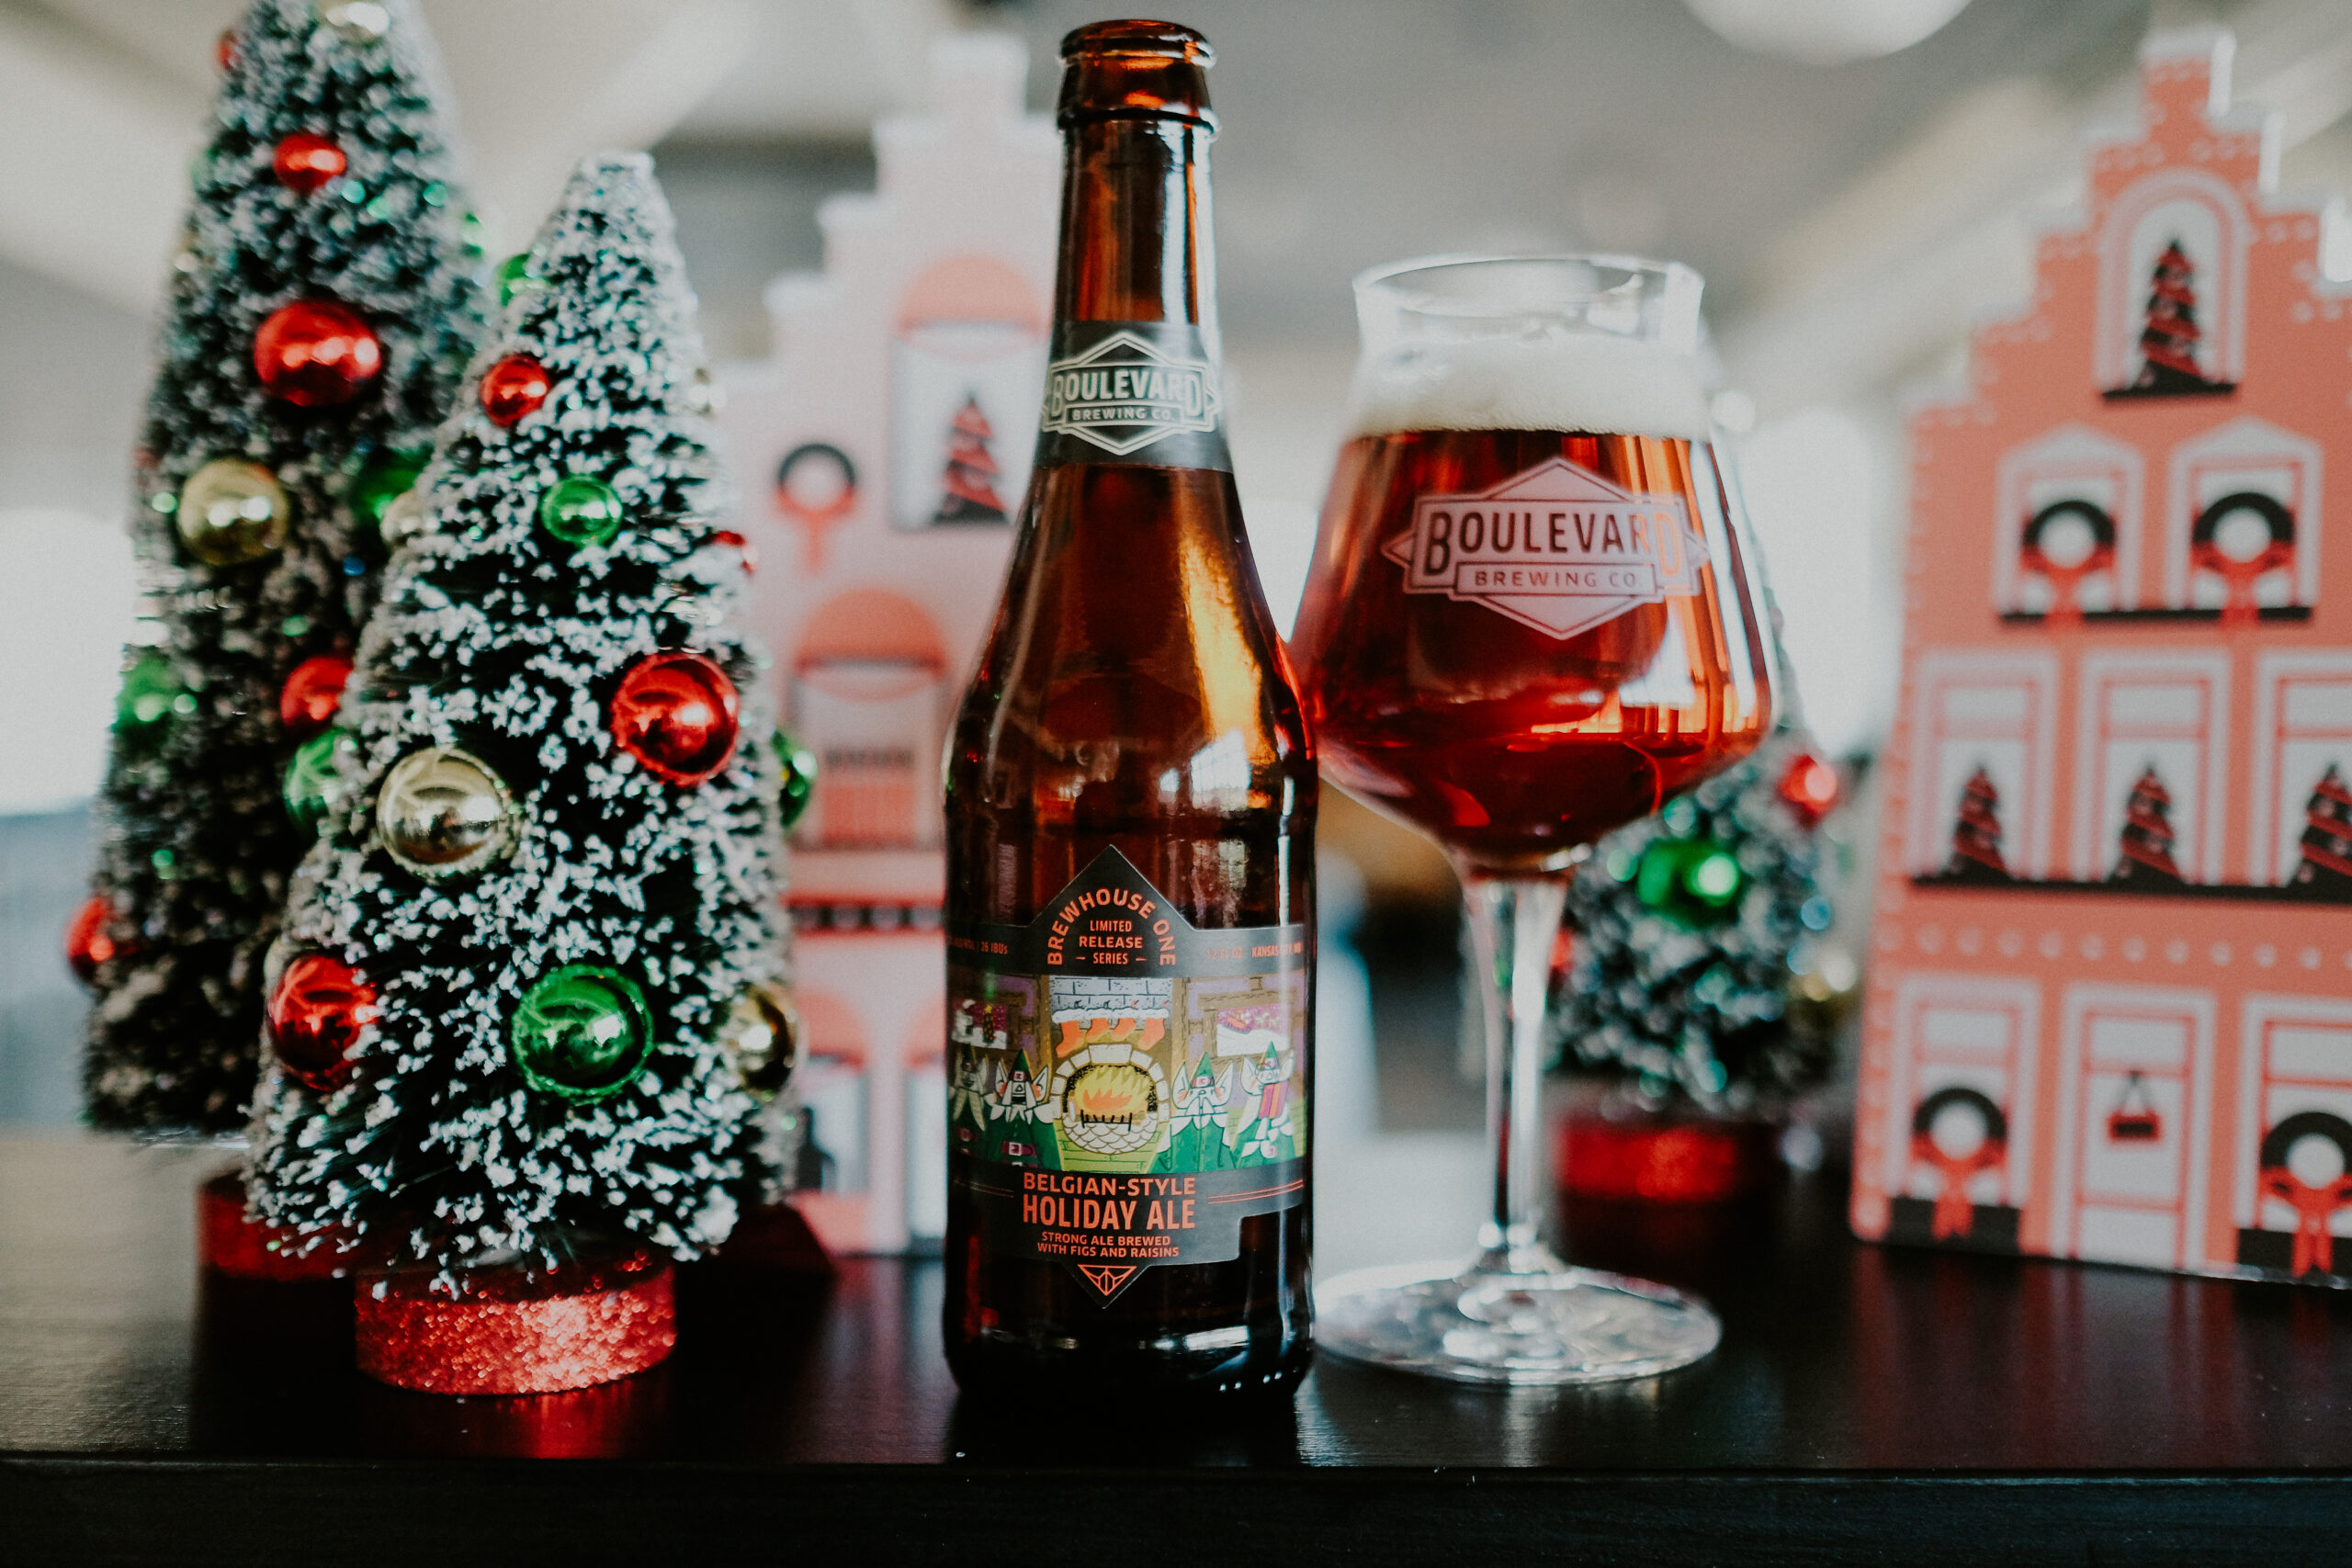 Brewhouse One Series Release – Belgian-style Holiday Ale